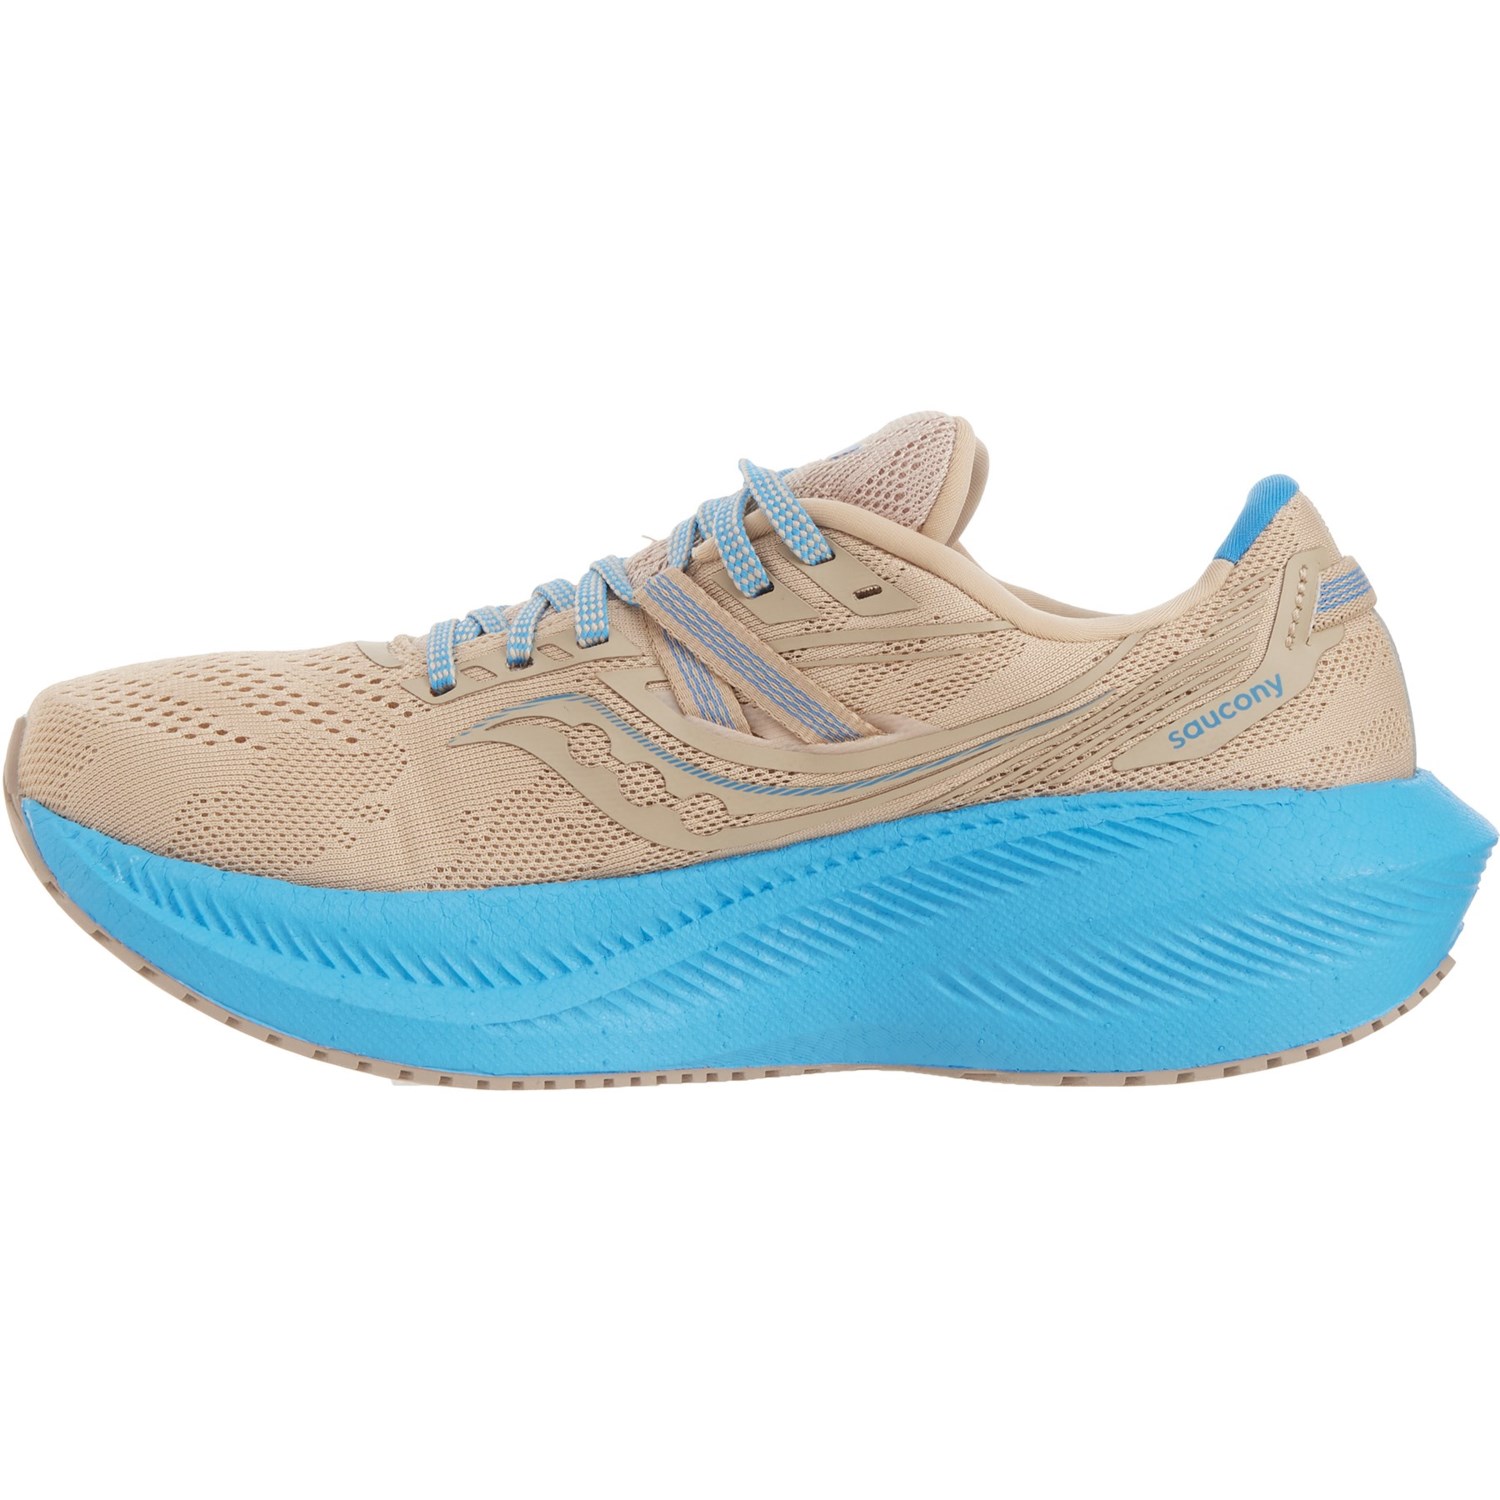 Saucony Triumph 20 Running Shoes (For Women) - Save 46%